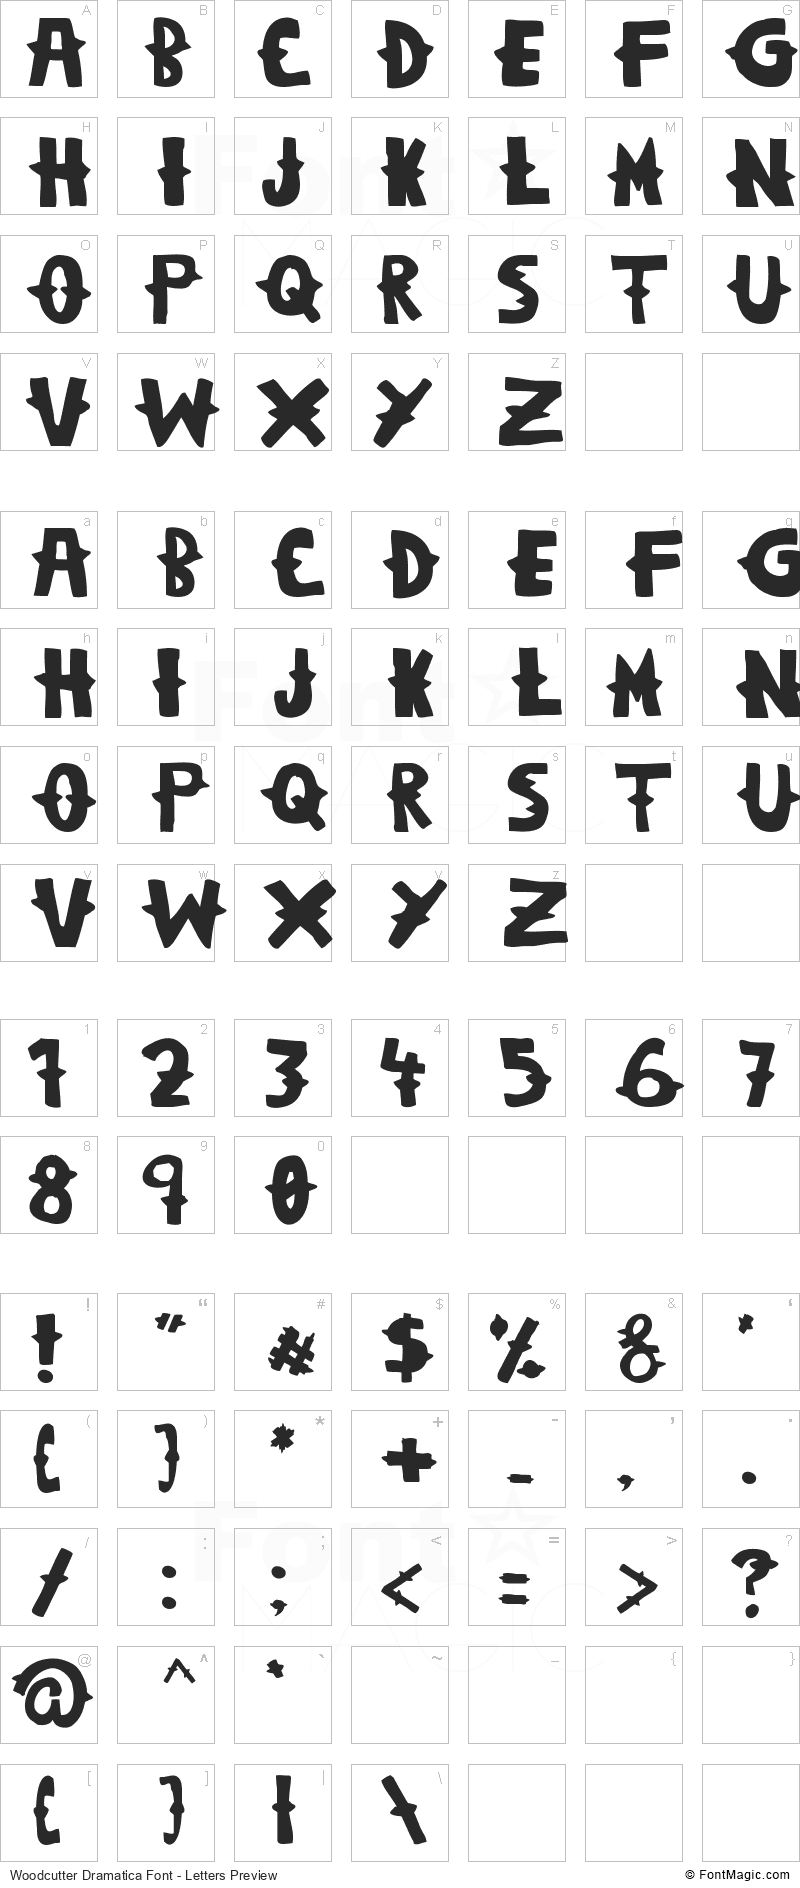 Woodcutter Dramatica Font - All Latters Preview Chart